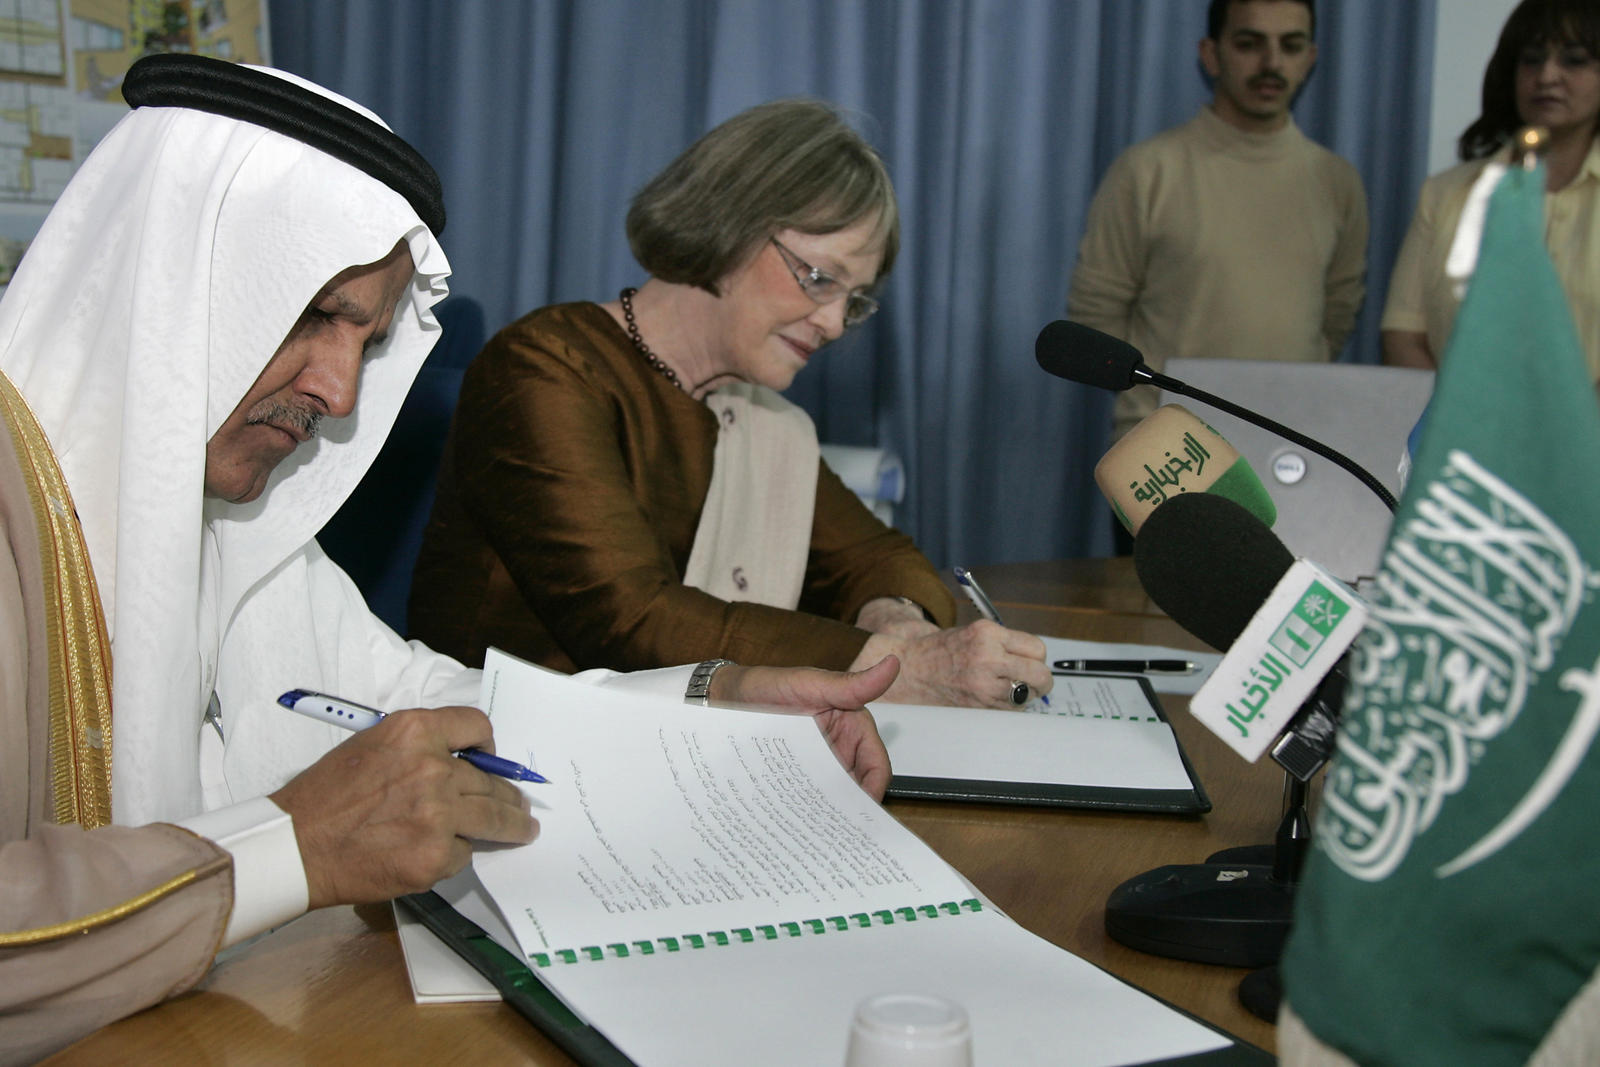 AbuZayd, head of the UNRWA, and Bassam, vice chairman of the Saudi Fund, sign a donation agreement in Amman